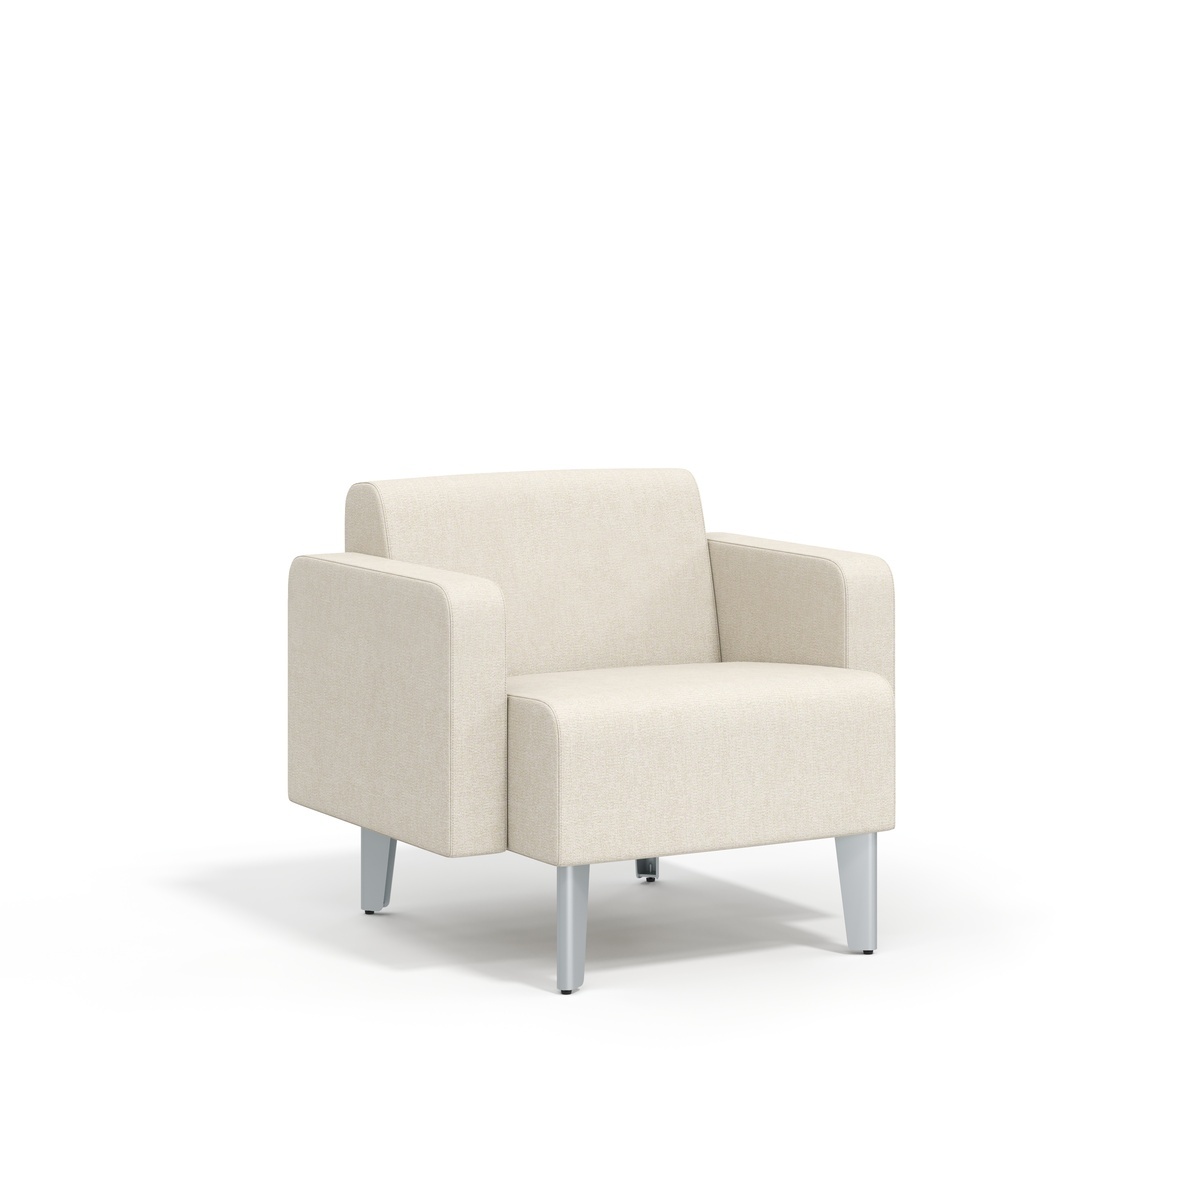 Single Seat, upholstered arms Photo